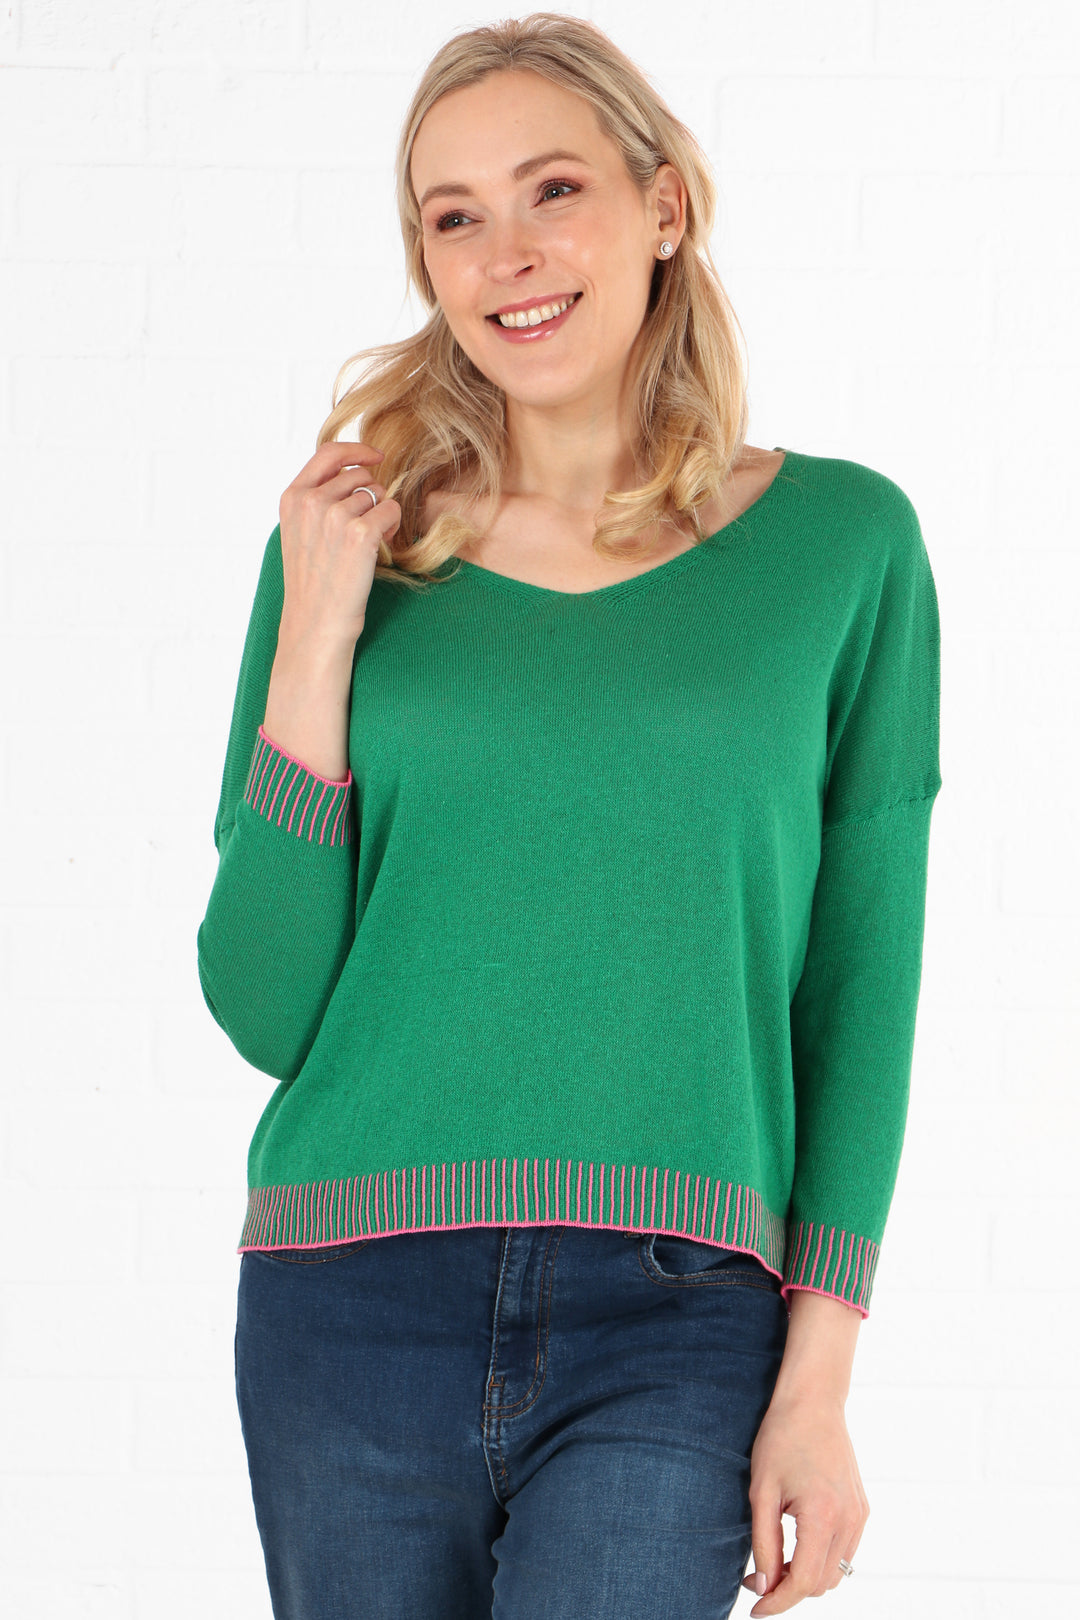 green cotton v-neck jumper with pink stitching along the edge of the cuffs and trim